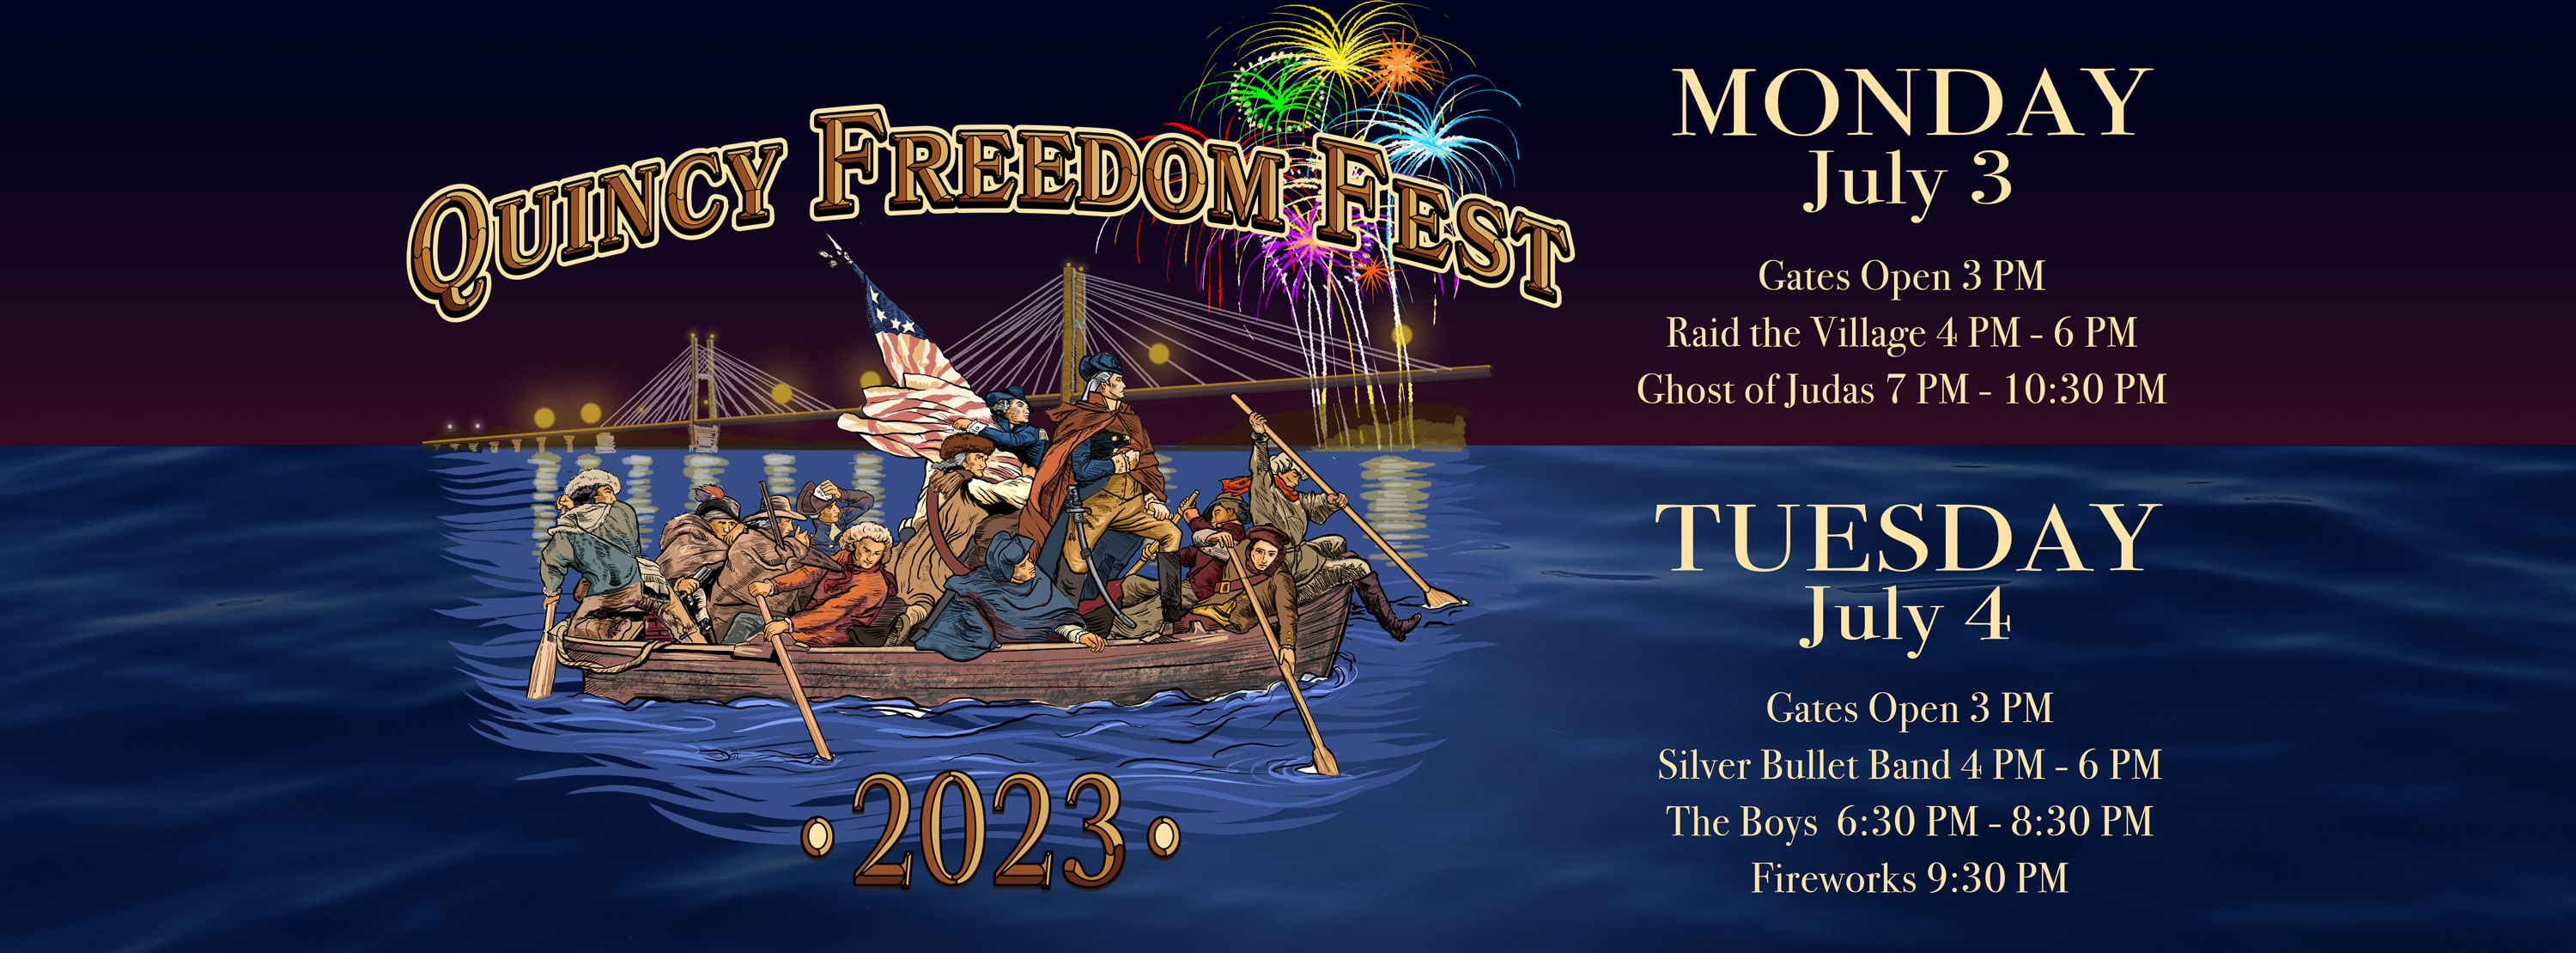 No Meeting in July and Quincy Freedom Fest